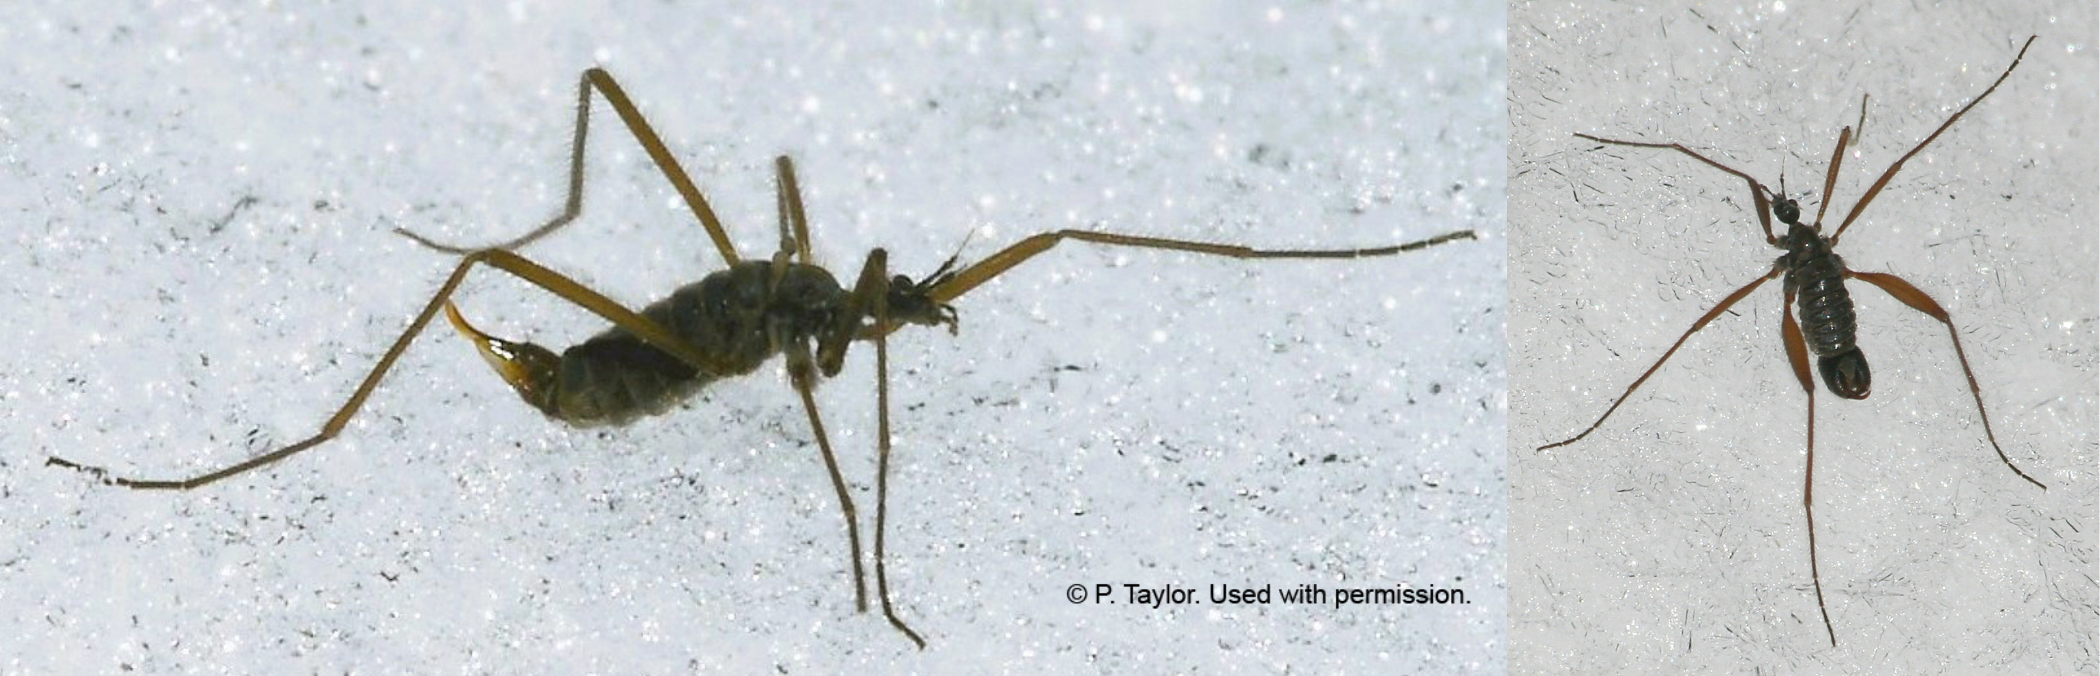 Two photos: One the left, a snow fly from the side, stepping forward. On the right, a male snow fly, a wingless crane fly with long legs, walking on snow.